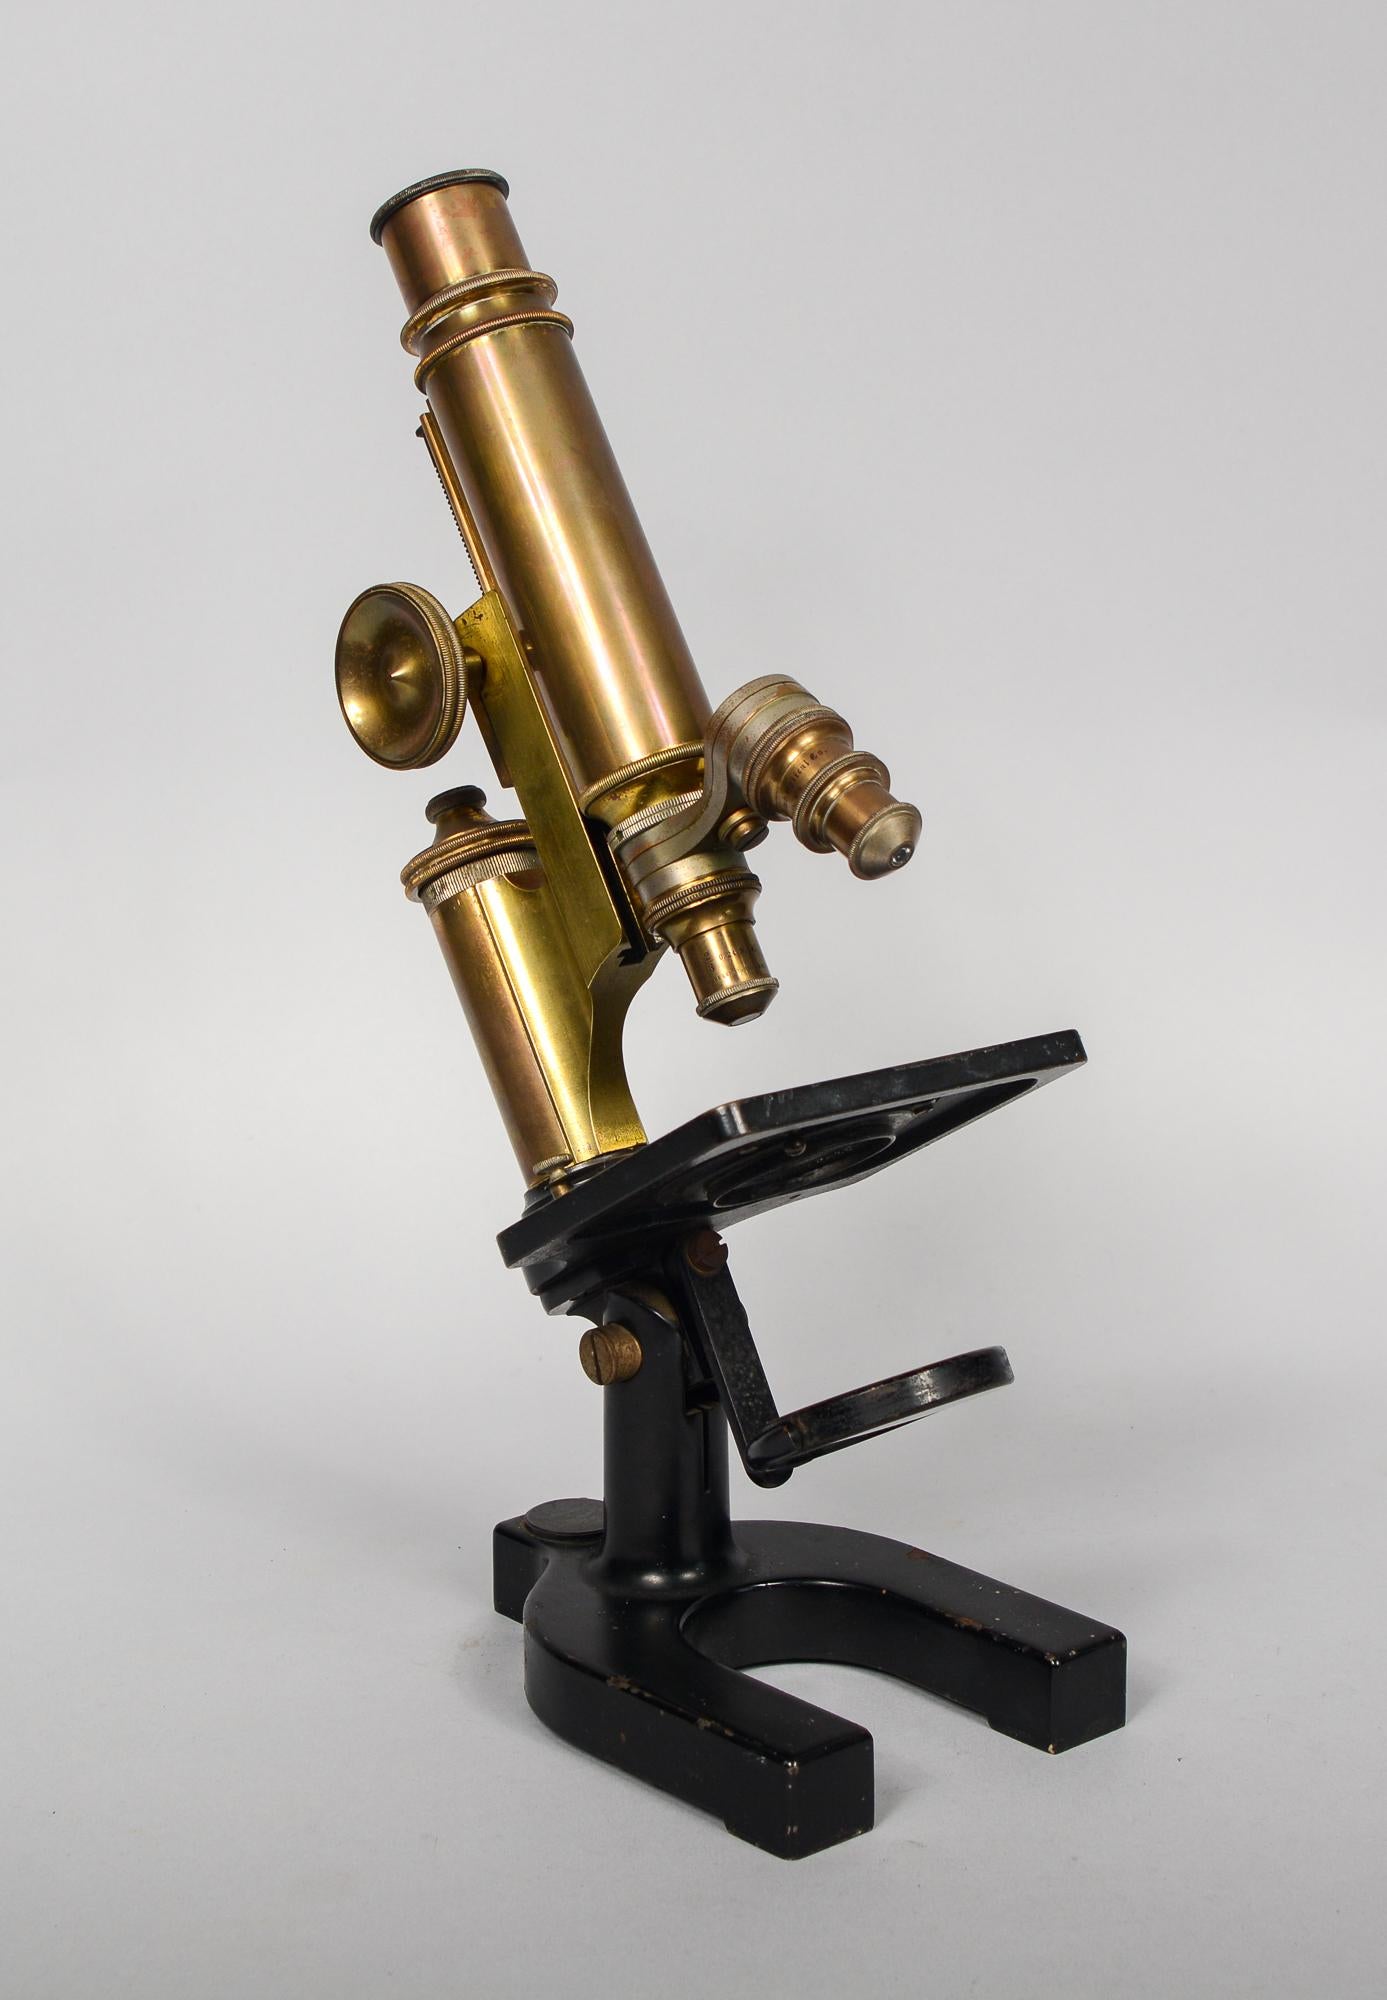 Brass and iron Bausch and Lomb microscope. This has a patent date of February 16, 1897. This microscope has two objectives. This is from an older collection belonging to a doctor. We do not know the functionality of this. The fine tuning is a little